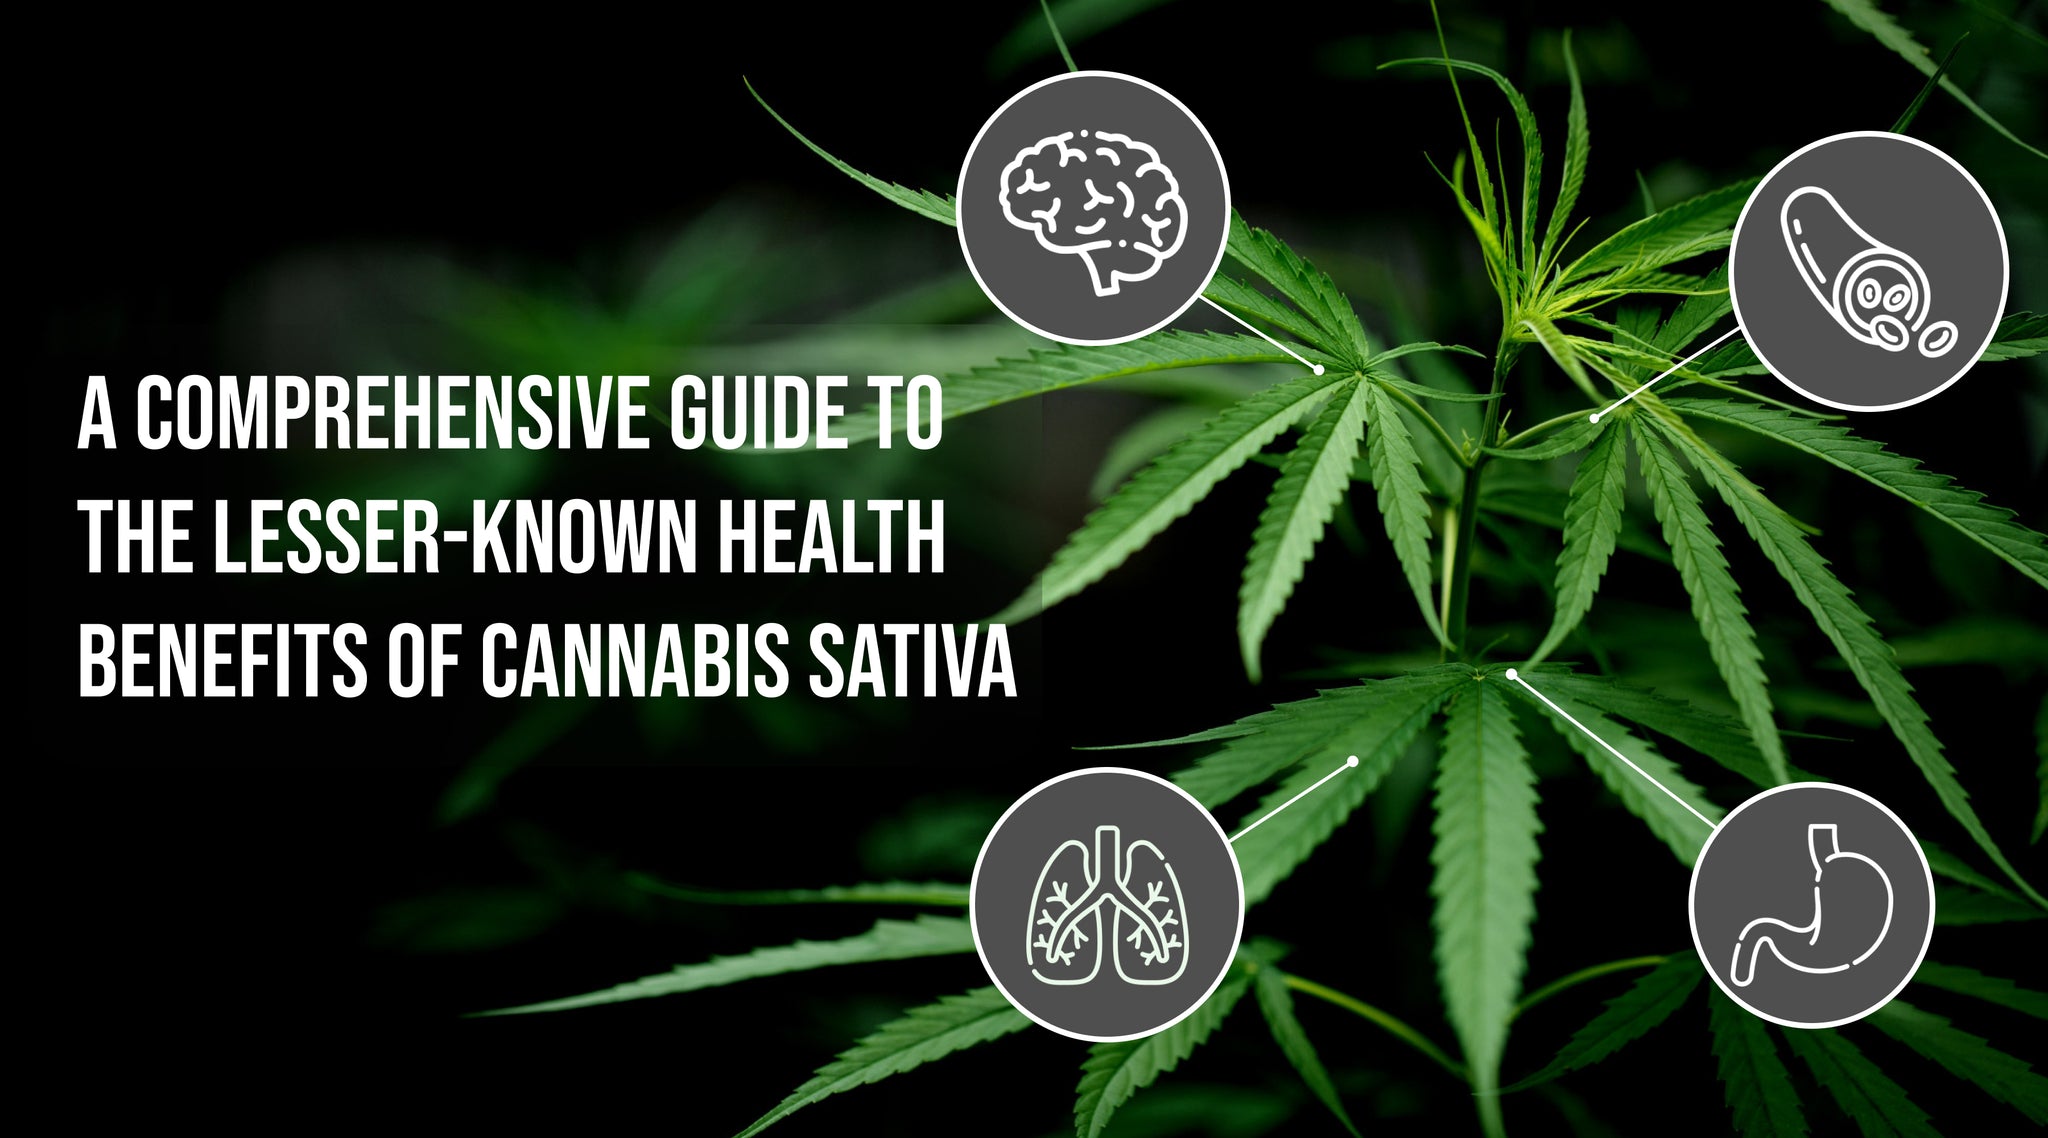 A Comprehensive Guide to the Lesser-Known Health Benefits of Cannabis Sativa